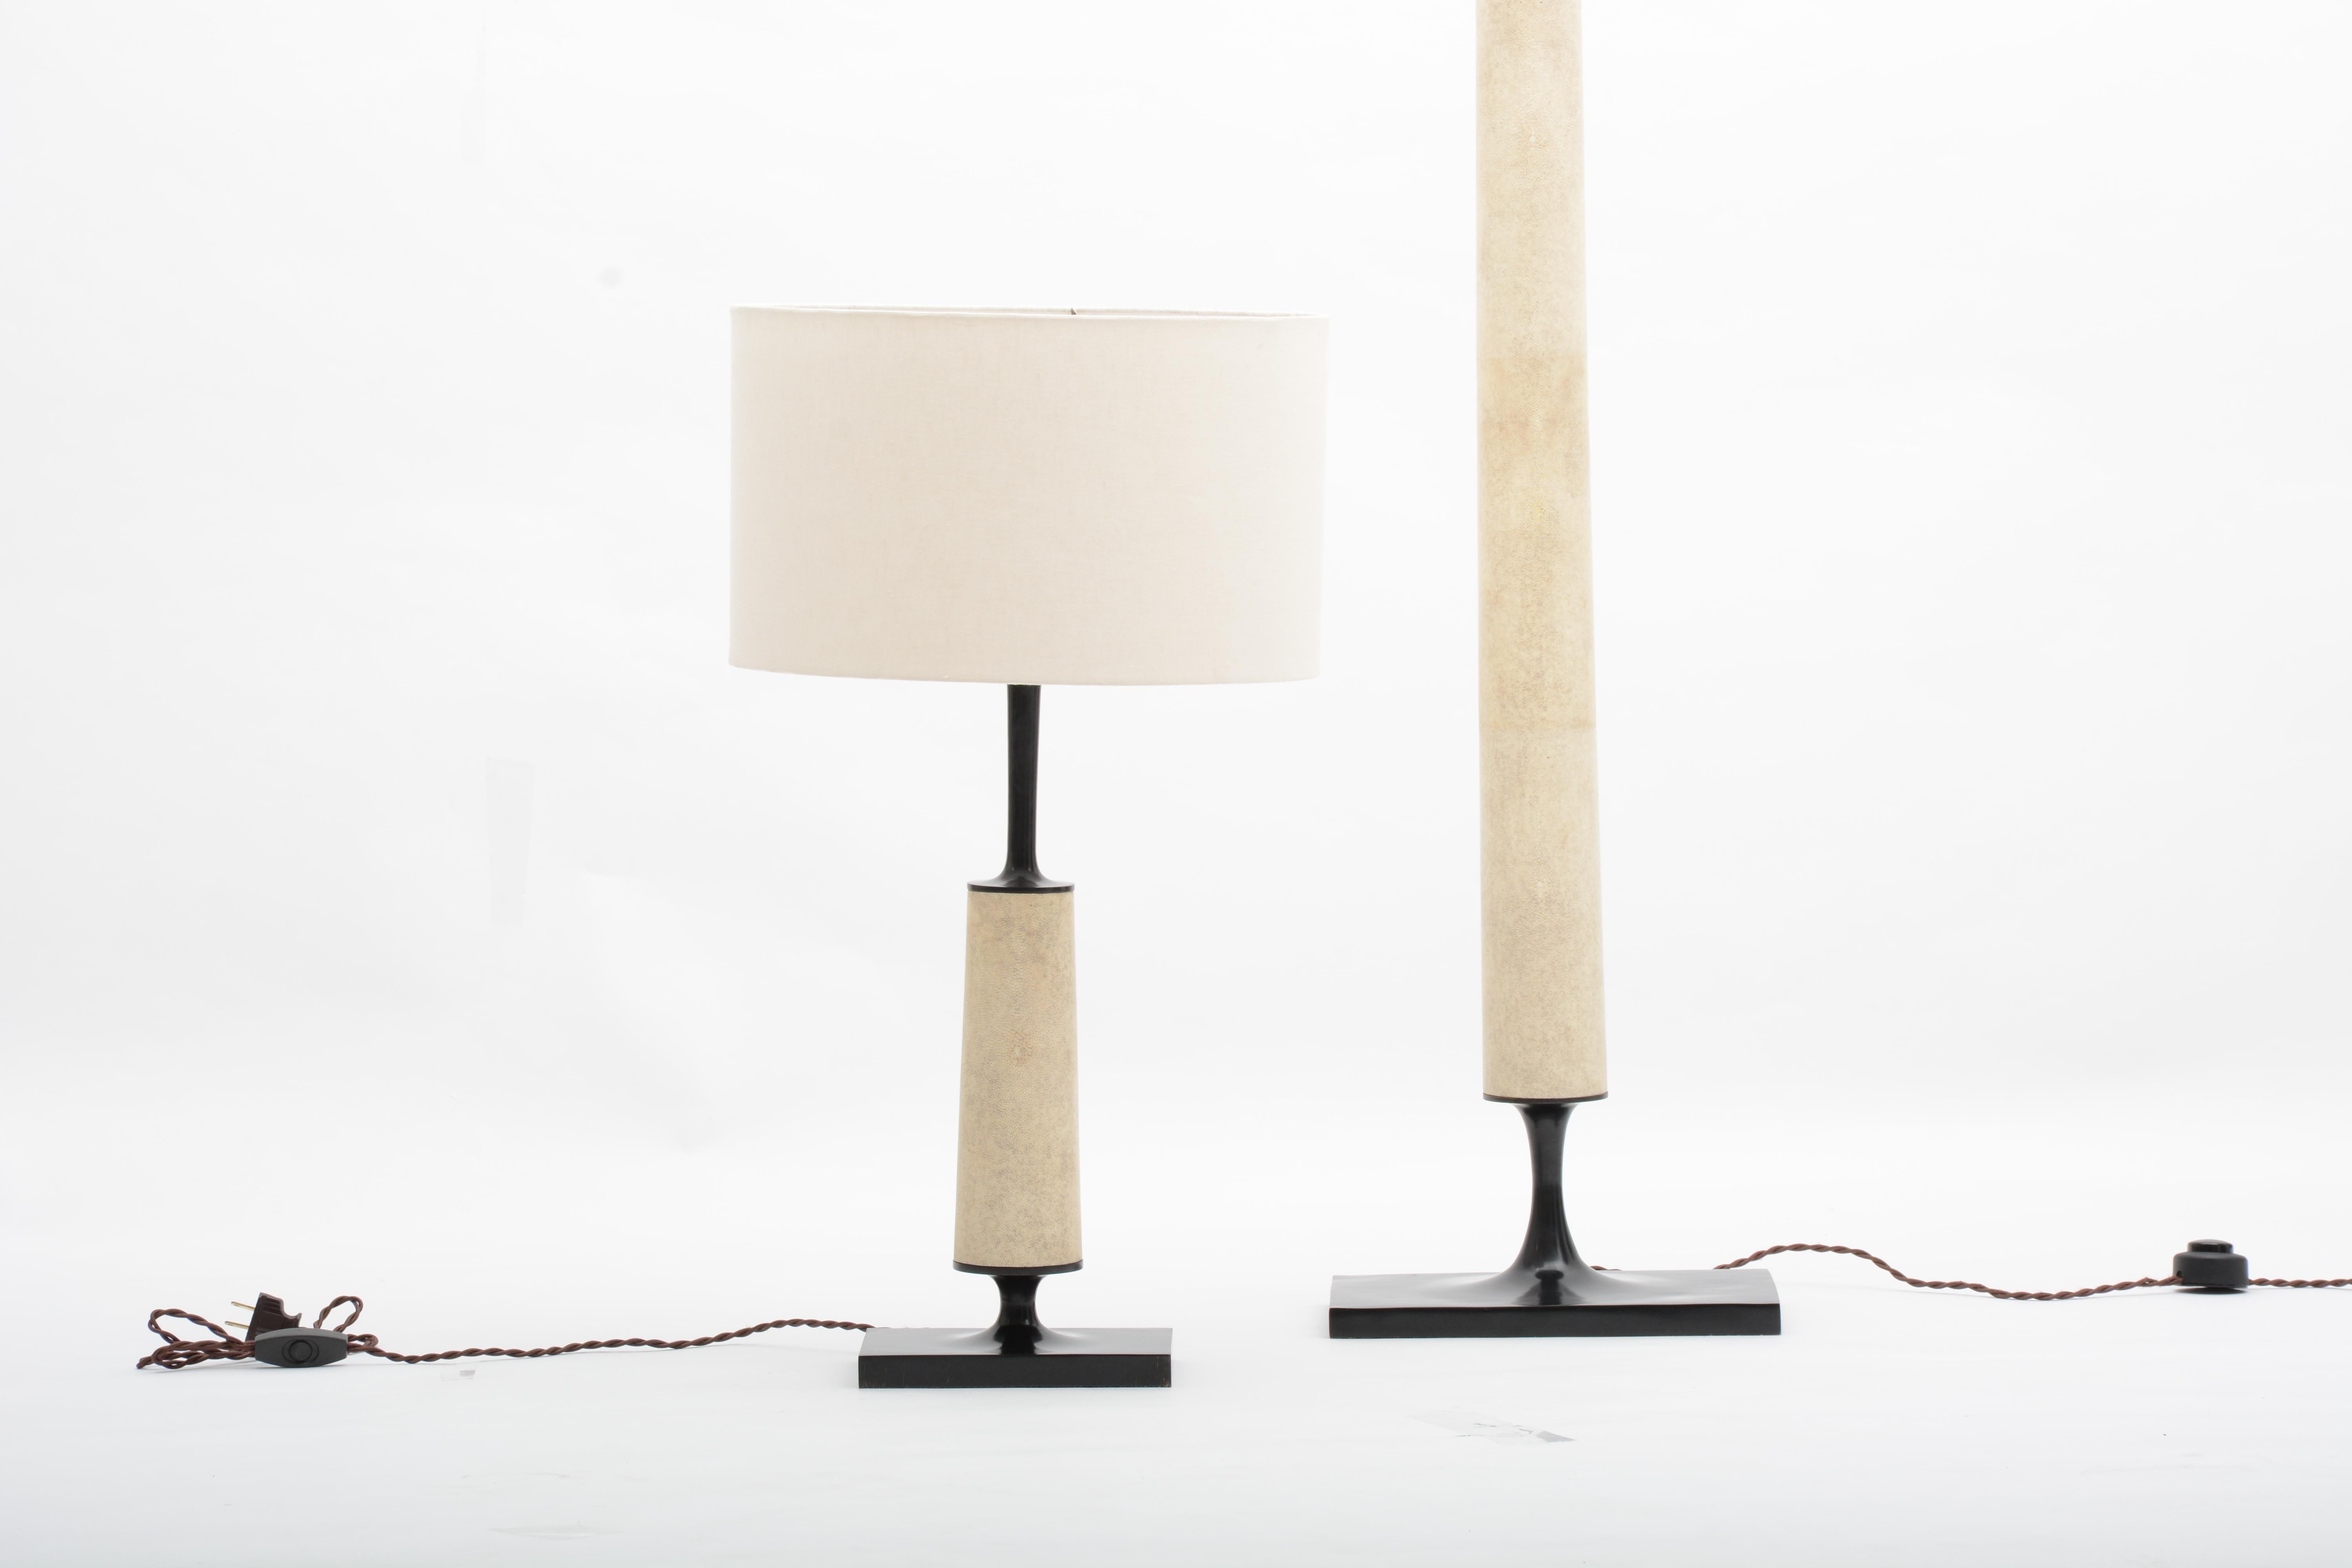 The Jaya table lamp is comprised of a cast bronze base, wrapped in natural shagreen. A classically modern lamp clad in noble materials. 

Cast bronze lamp with shagreen stem and linen shade produced using the superior lost wax bronze casting